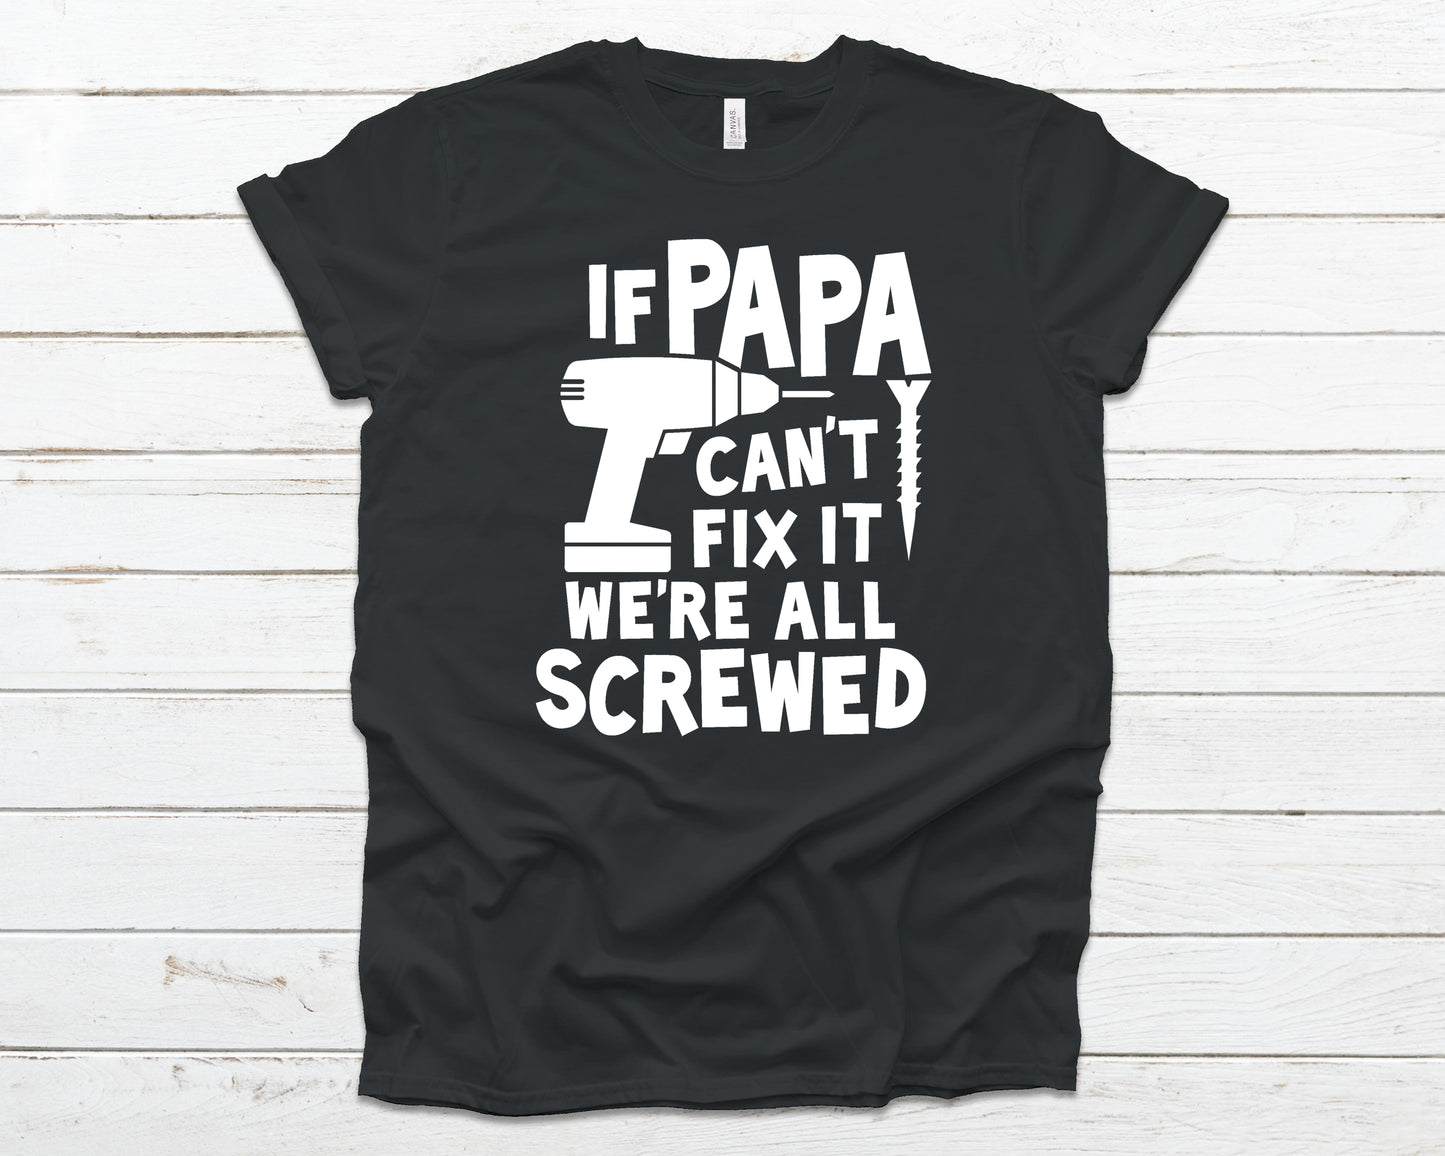 If Papa can't fix it we're all screwed